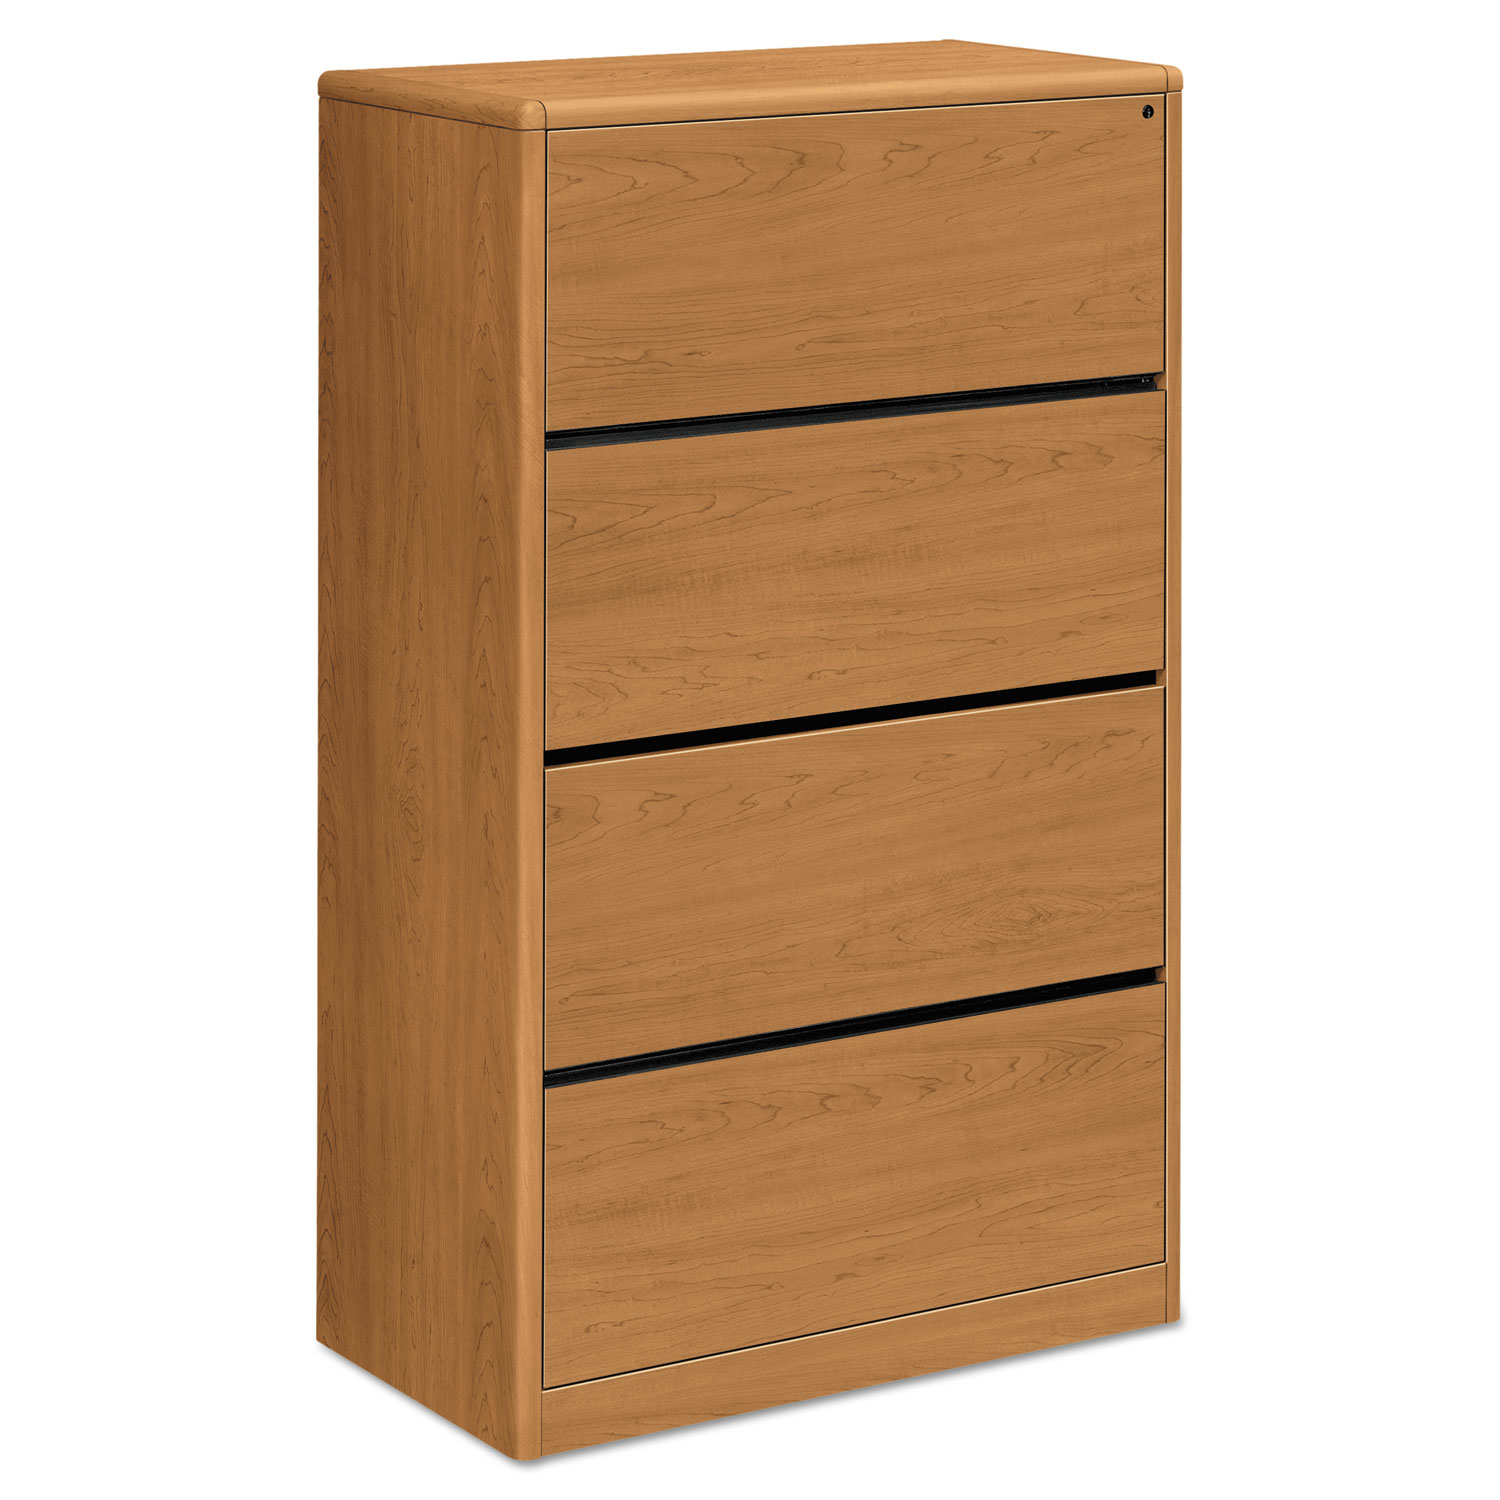 10700 Series Four Drawer Lateral File, 36w x 20d x 59 1/8h, Harvest